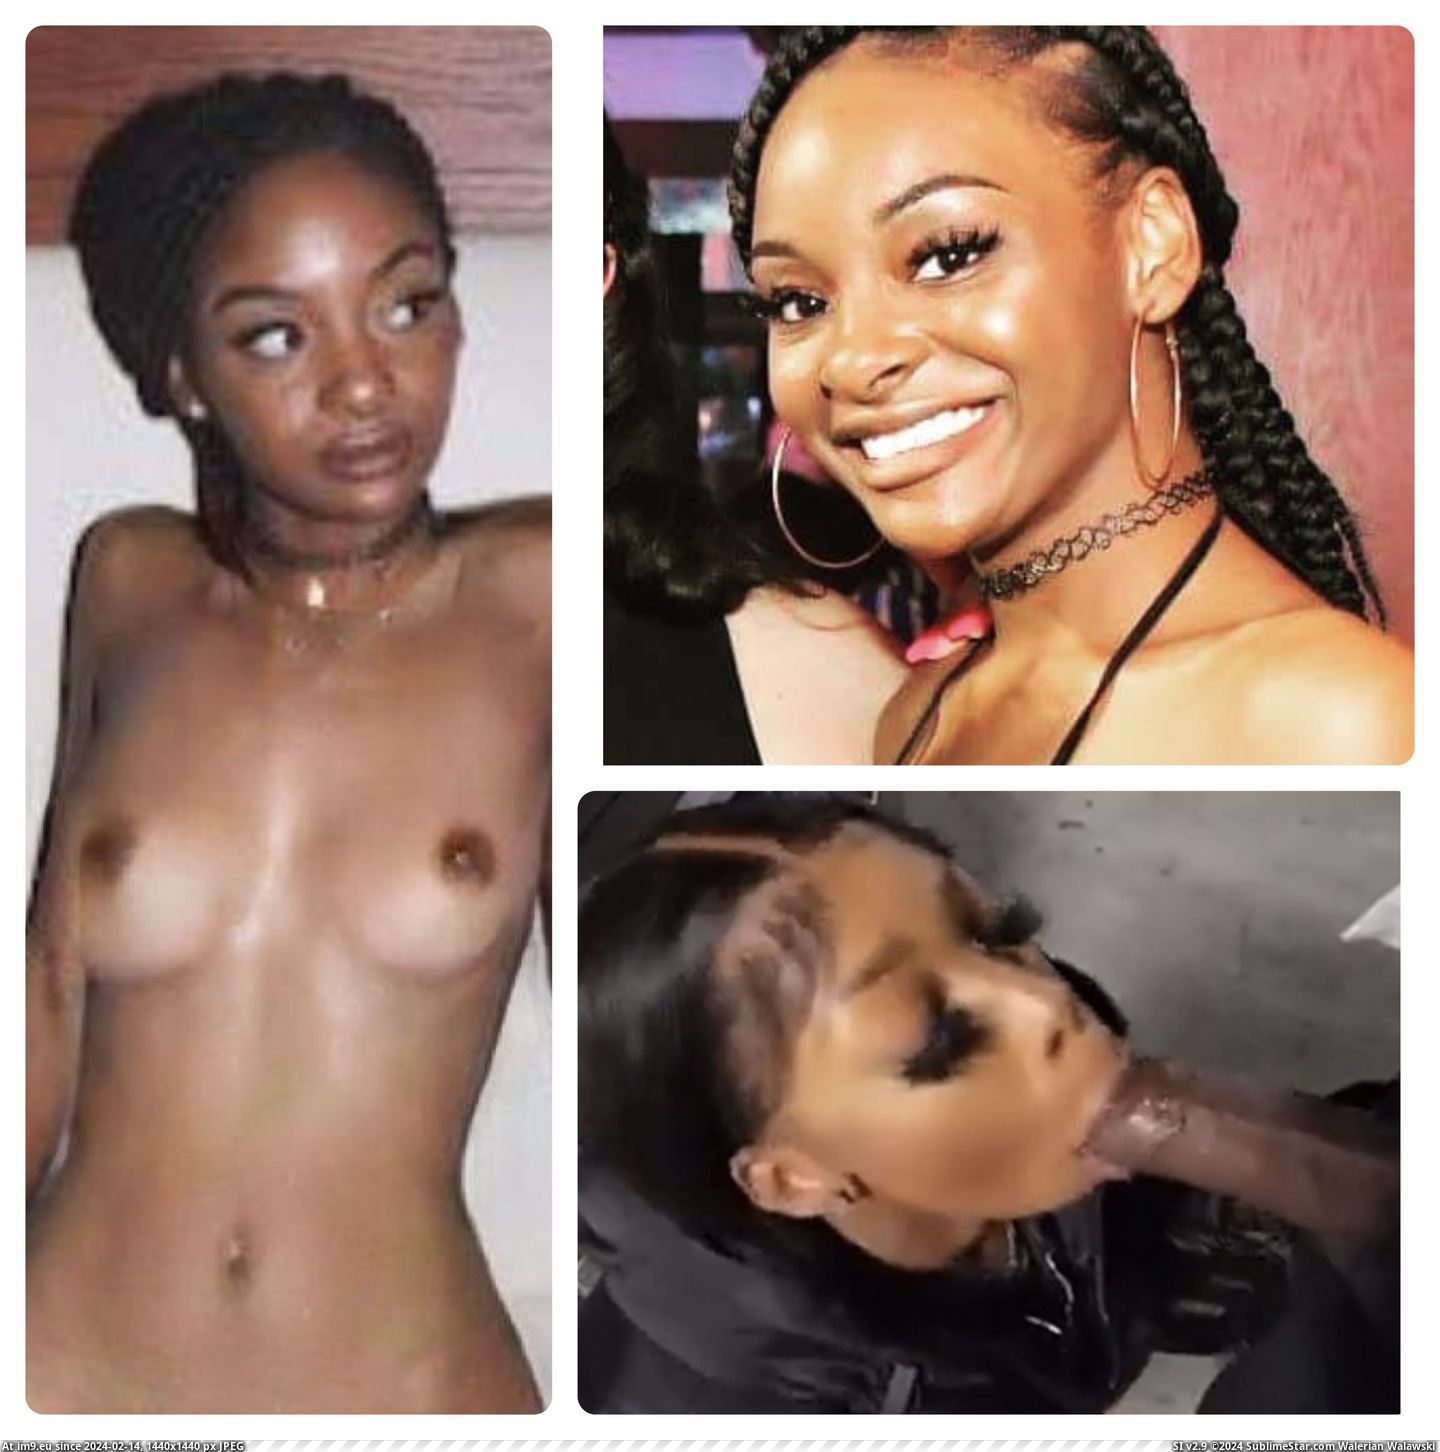 #Sex #White #Slave #Grabbed #Needing #Collages #Ebony #Aaliyah #Dallas Aaliyah White Ebony Collages - 045 Pic. (Obraz z album Aaliyah White, Dallas, TX Sex Slave needing to be grabbed and owned))